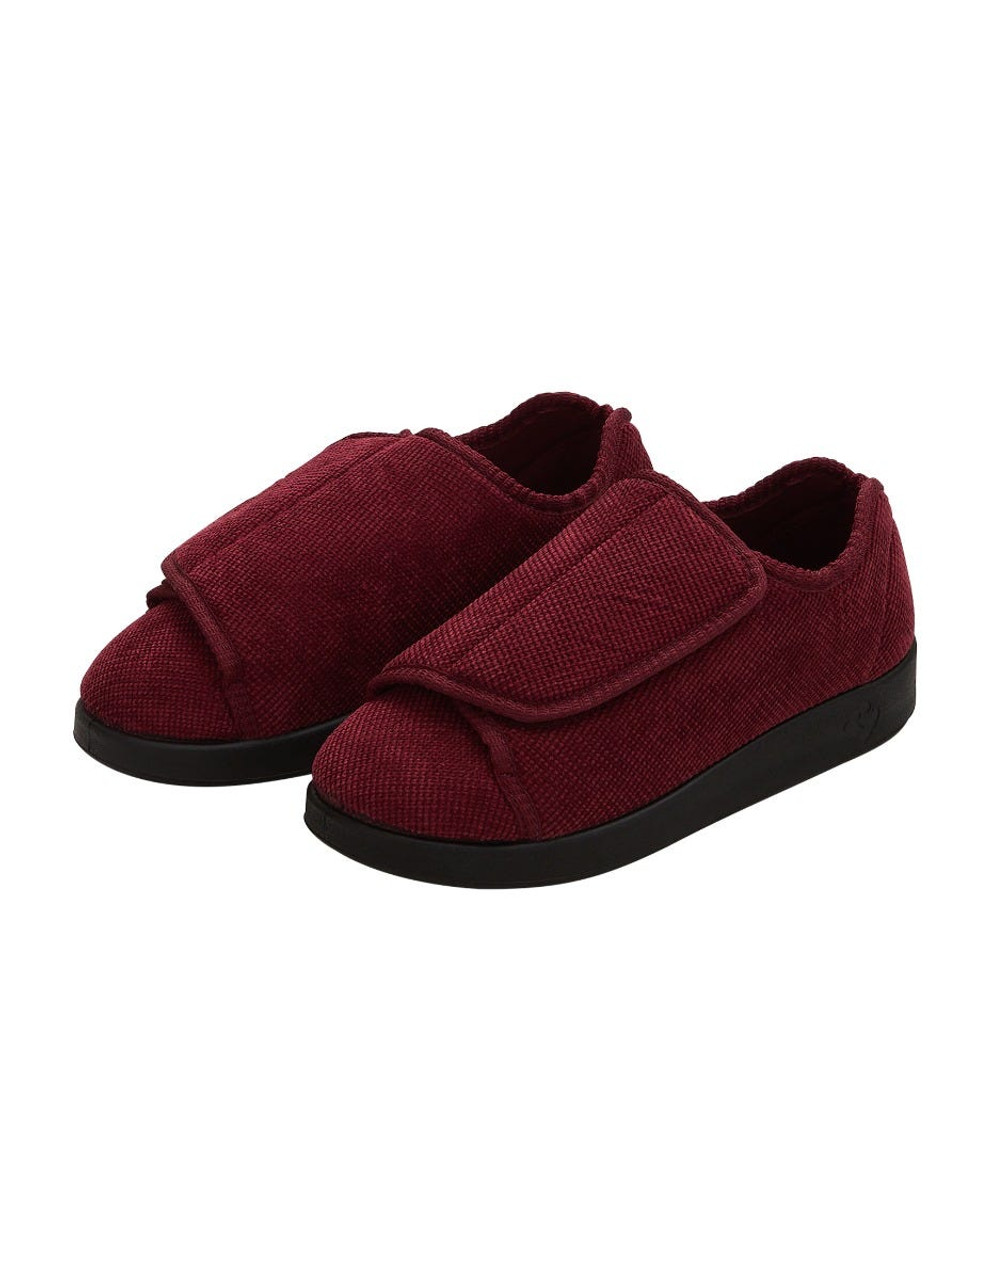 Silverts SV15100 Womens Extra Extra Wide Easy Closure Slippers Wine, Size=6, SV15100-SVWIB-6